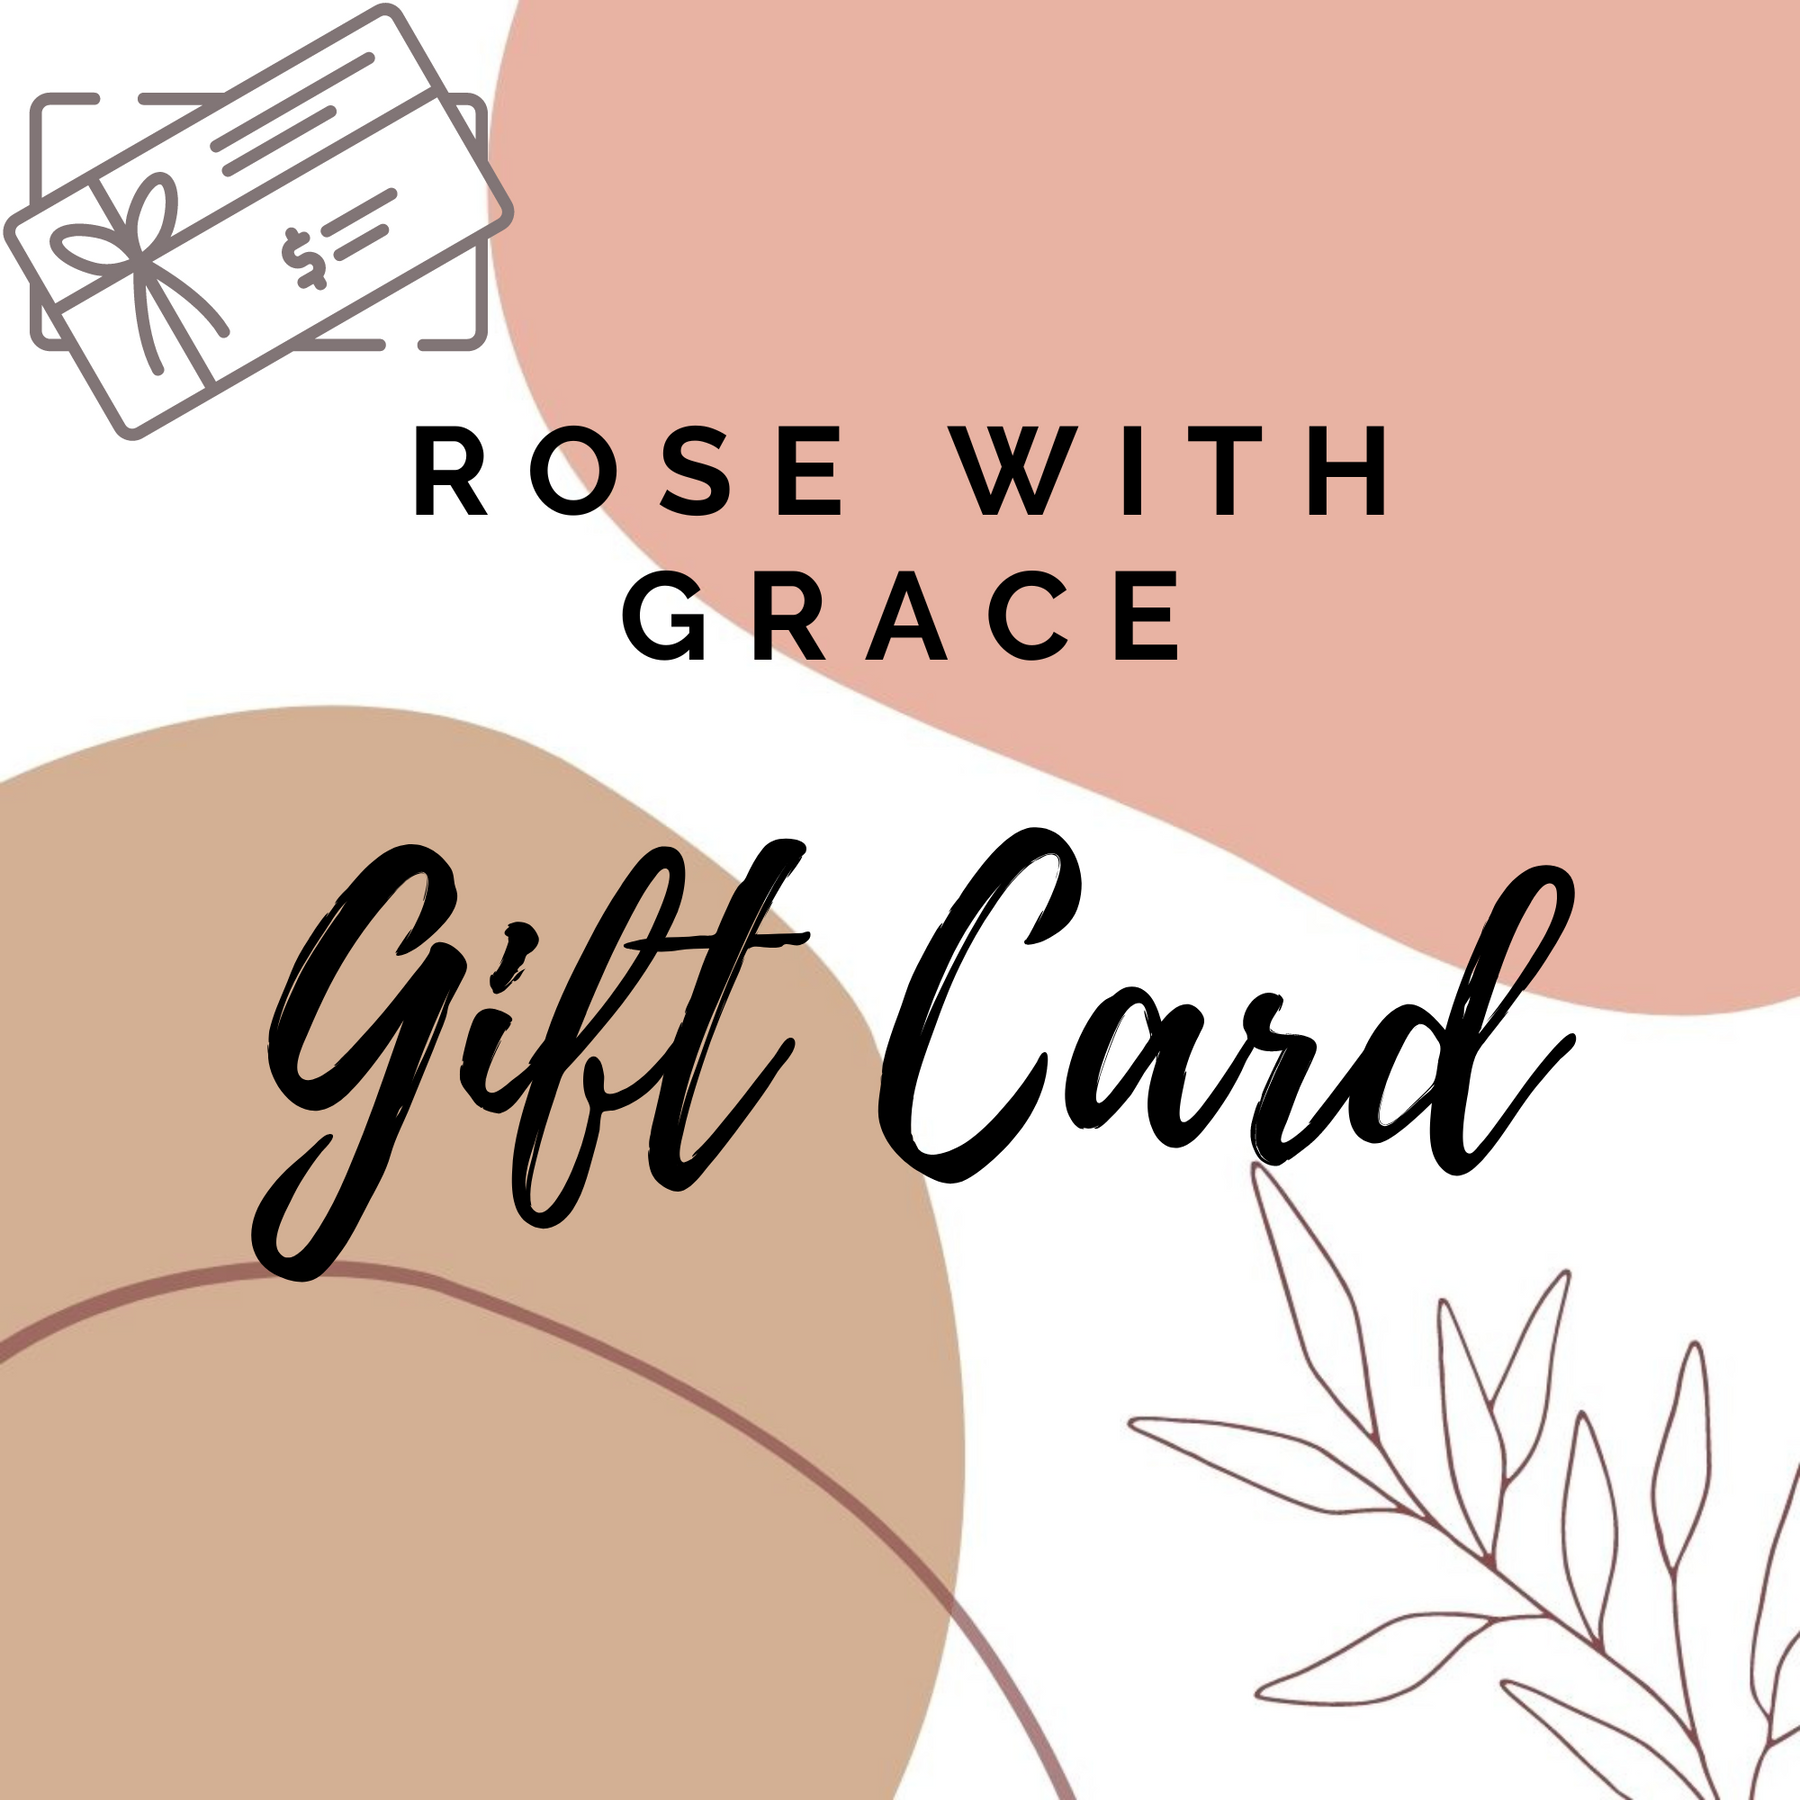 ROSE WITH GRACE GIFT CARD Rose with Grace LLC